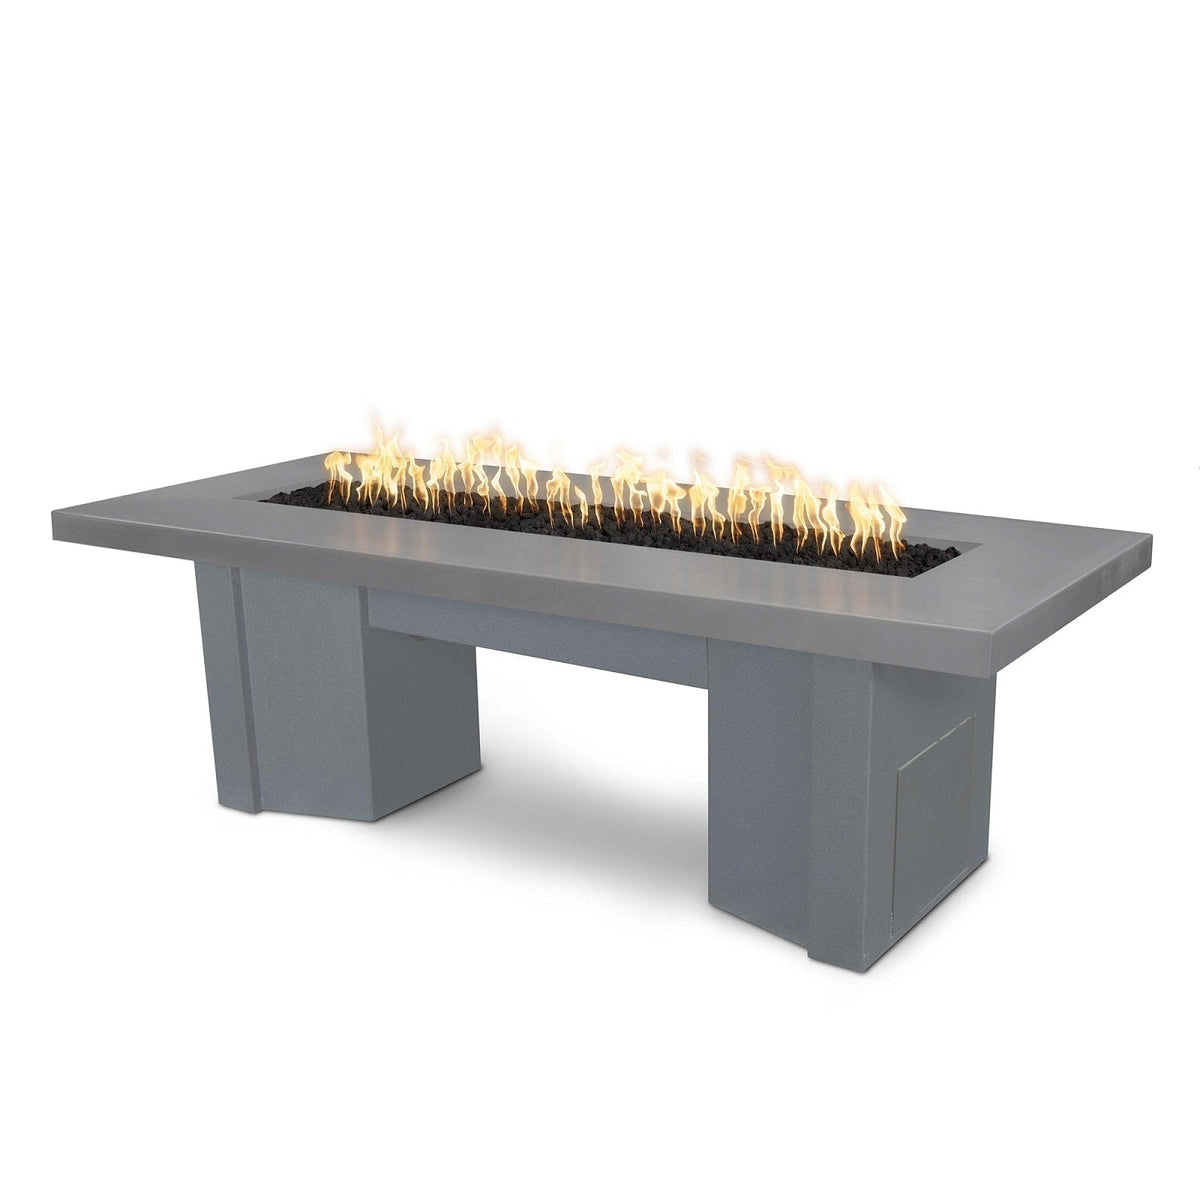 The Outdoor Plus Fire Features Natural Gray (-NGY) / Gray Powder Coated Steel (-GRY) The Outdoor Plus 78&quot; Alameda Fire Table Smooth Concrete in Liquid Propane - Match Lit with Flame Sense System / OPT-ALMGFRC78FSML-LP